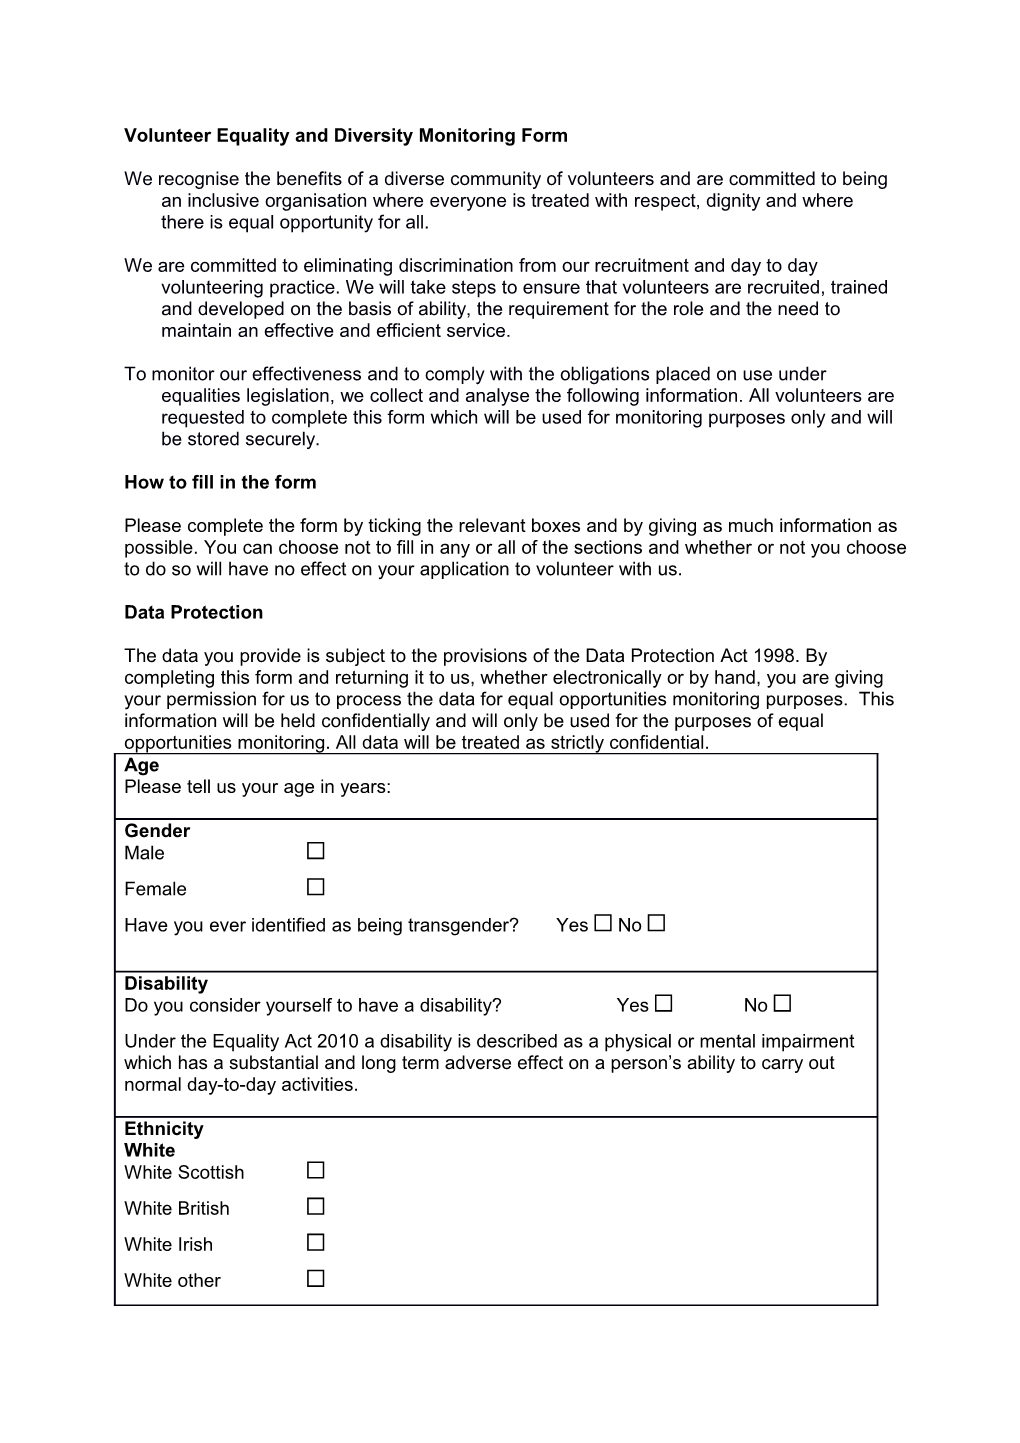 Volunteer Equality and Diversity Monitoring Form